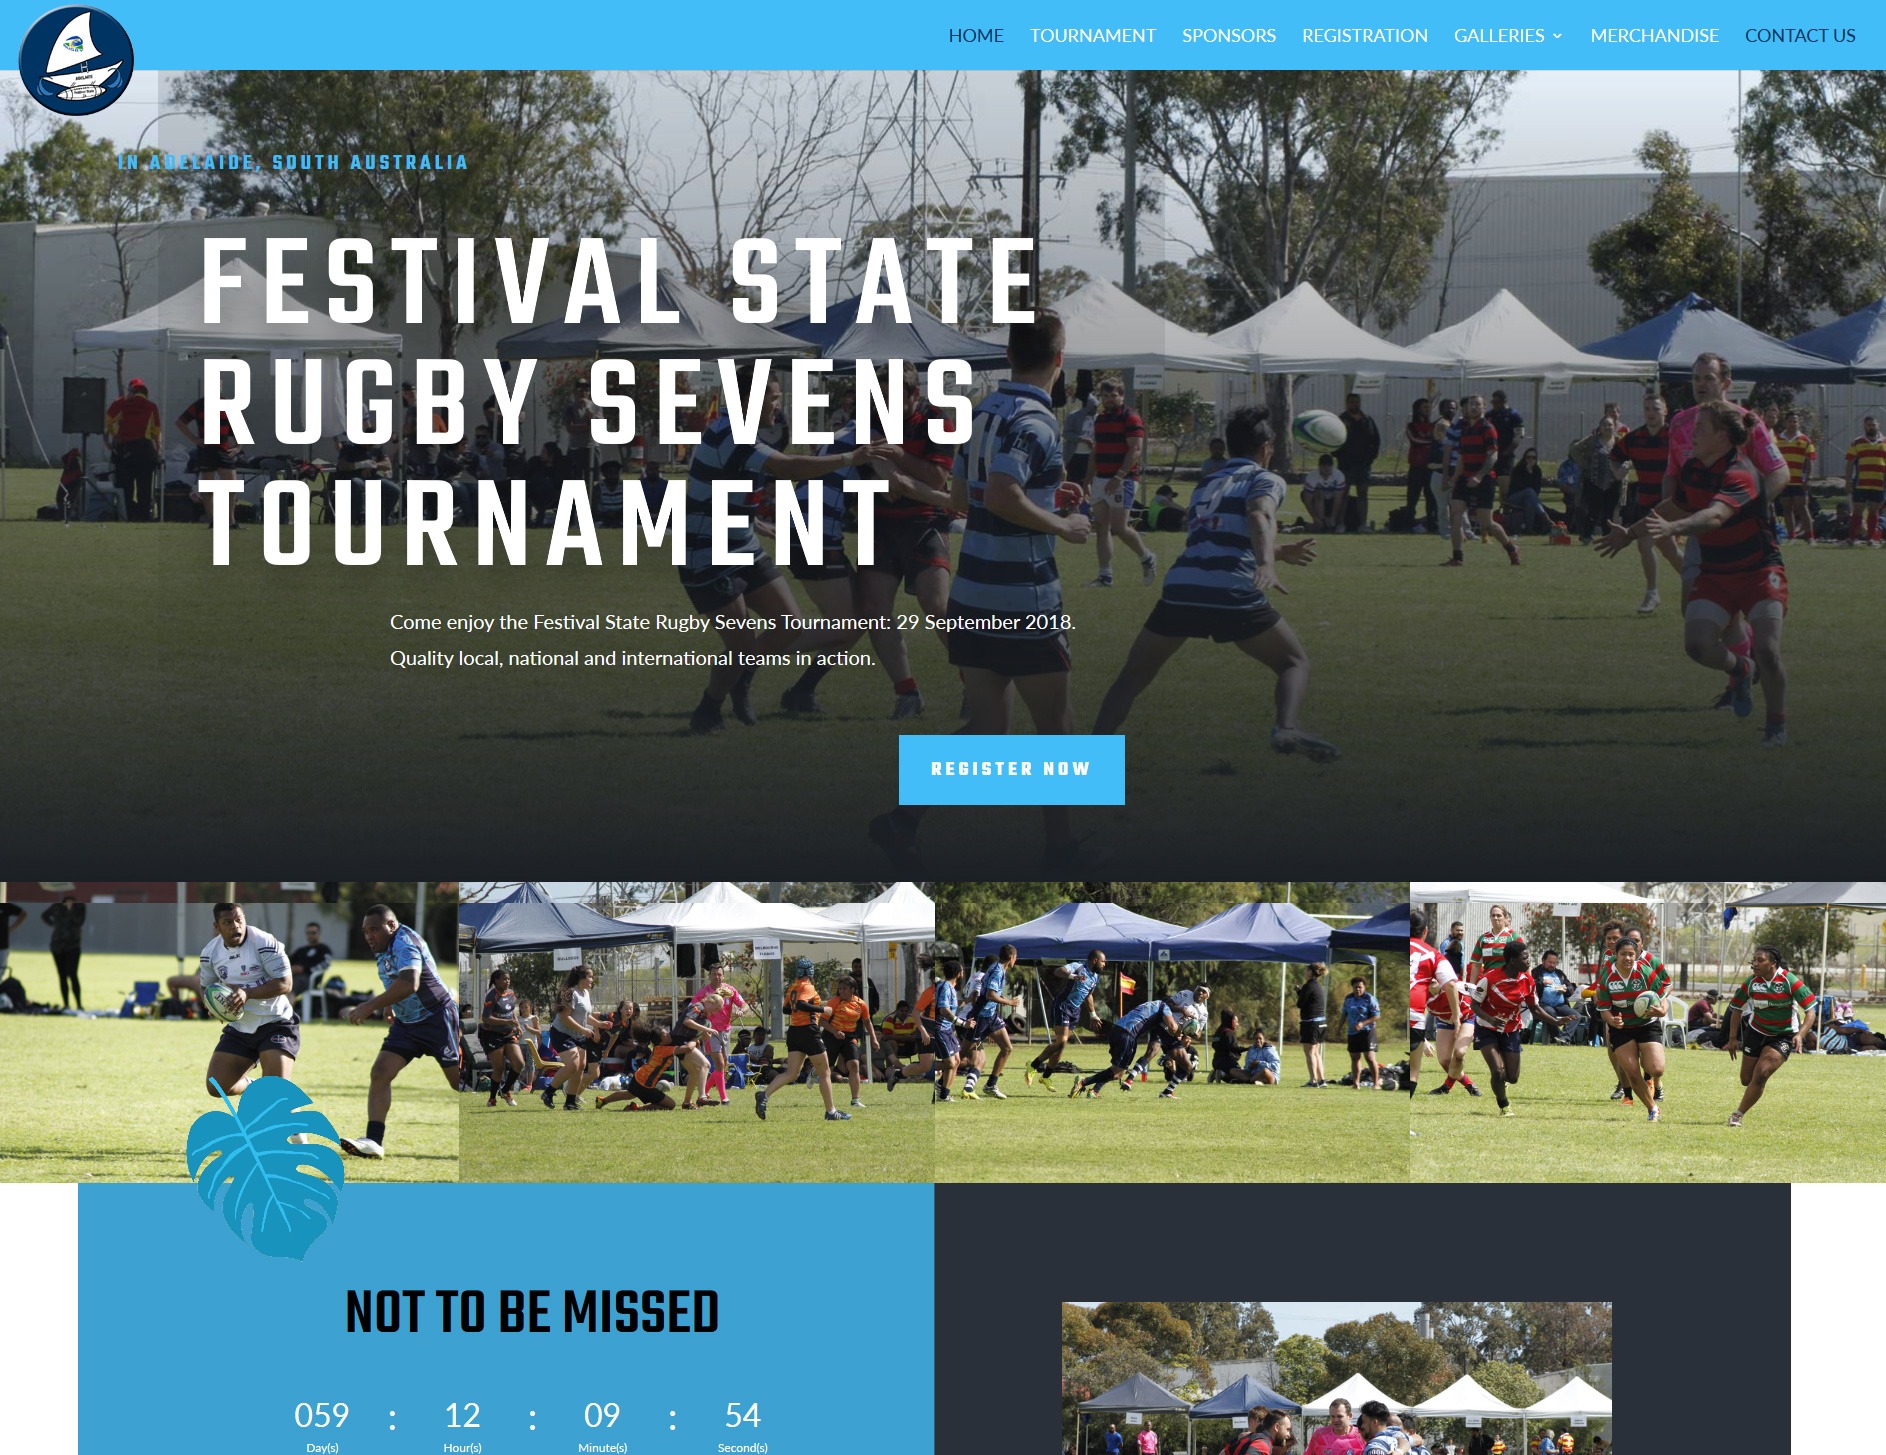 Website for Festival State Rugby Sevens Tournament